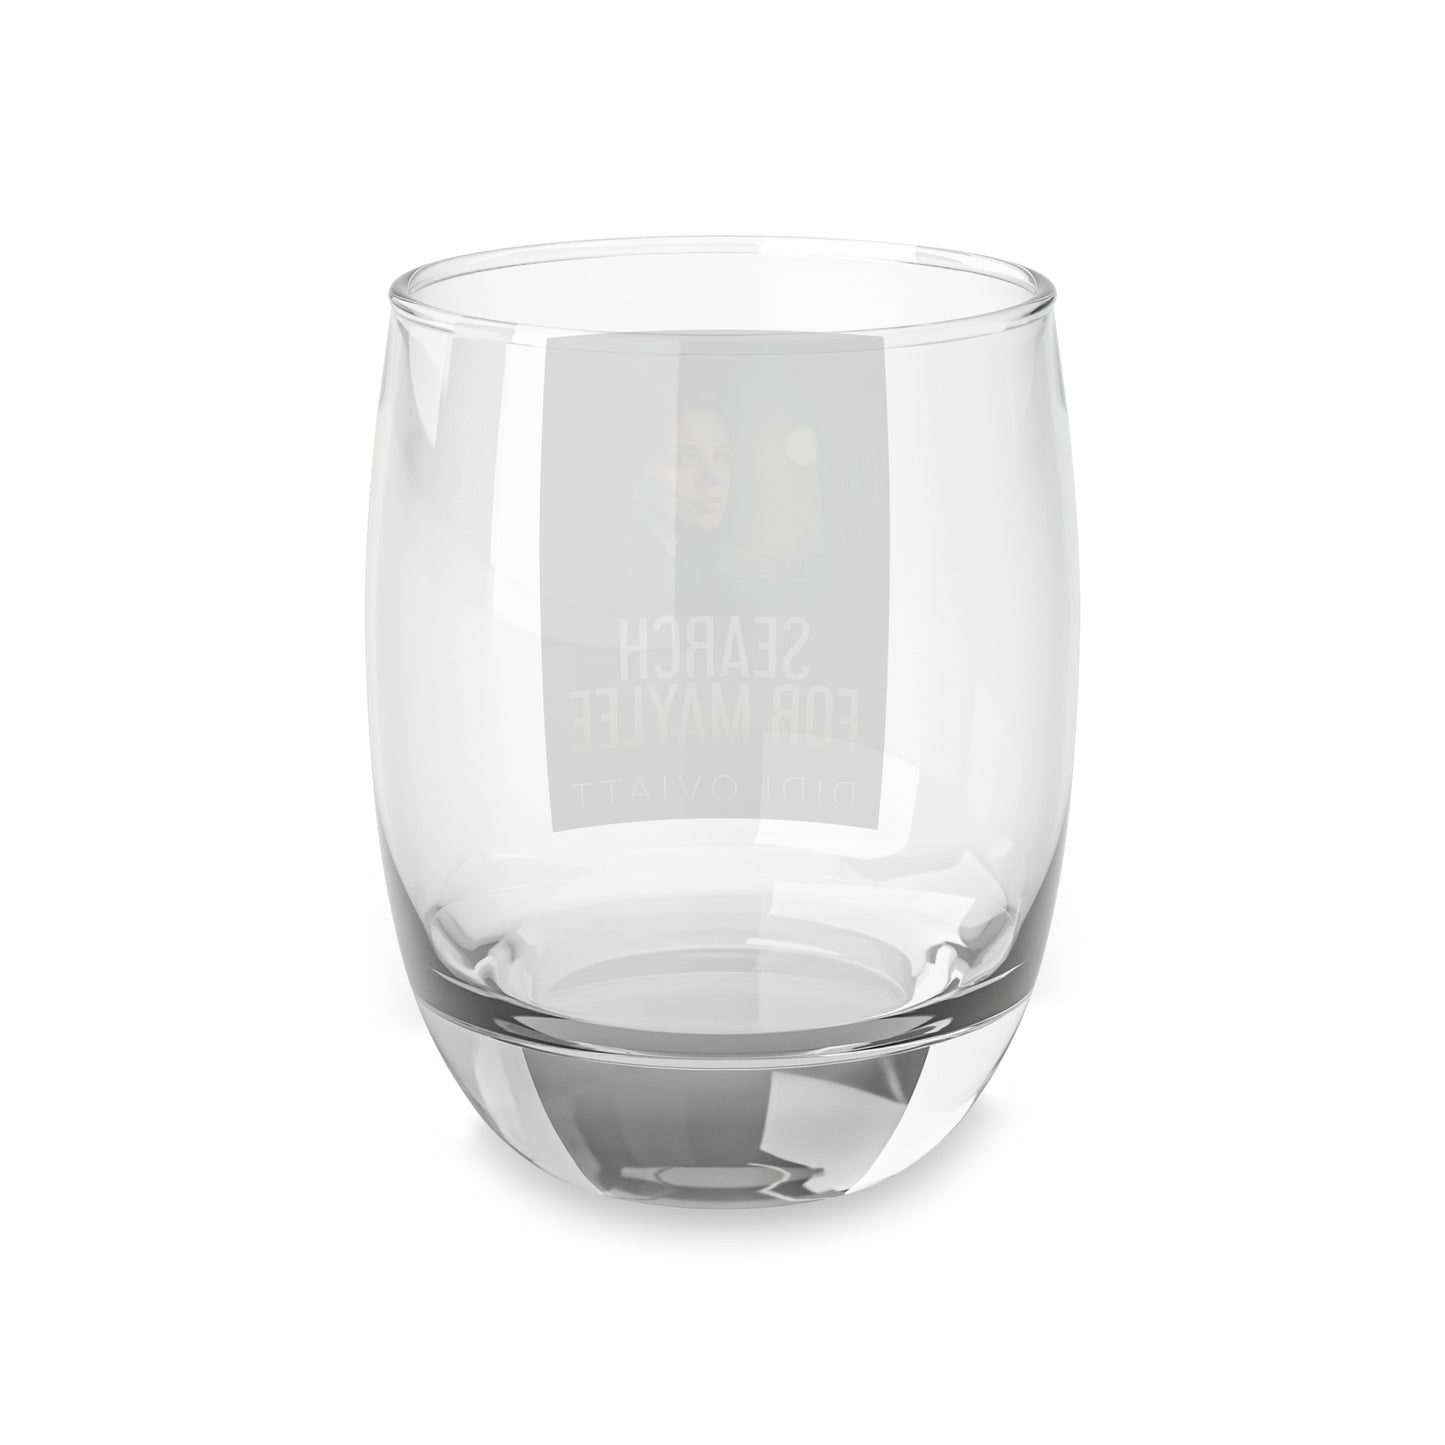 Search for Maylee - Whiskey Glass